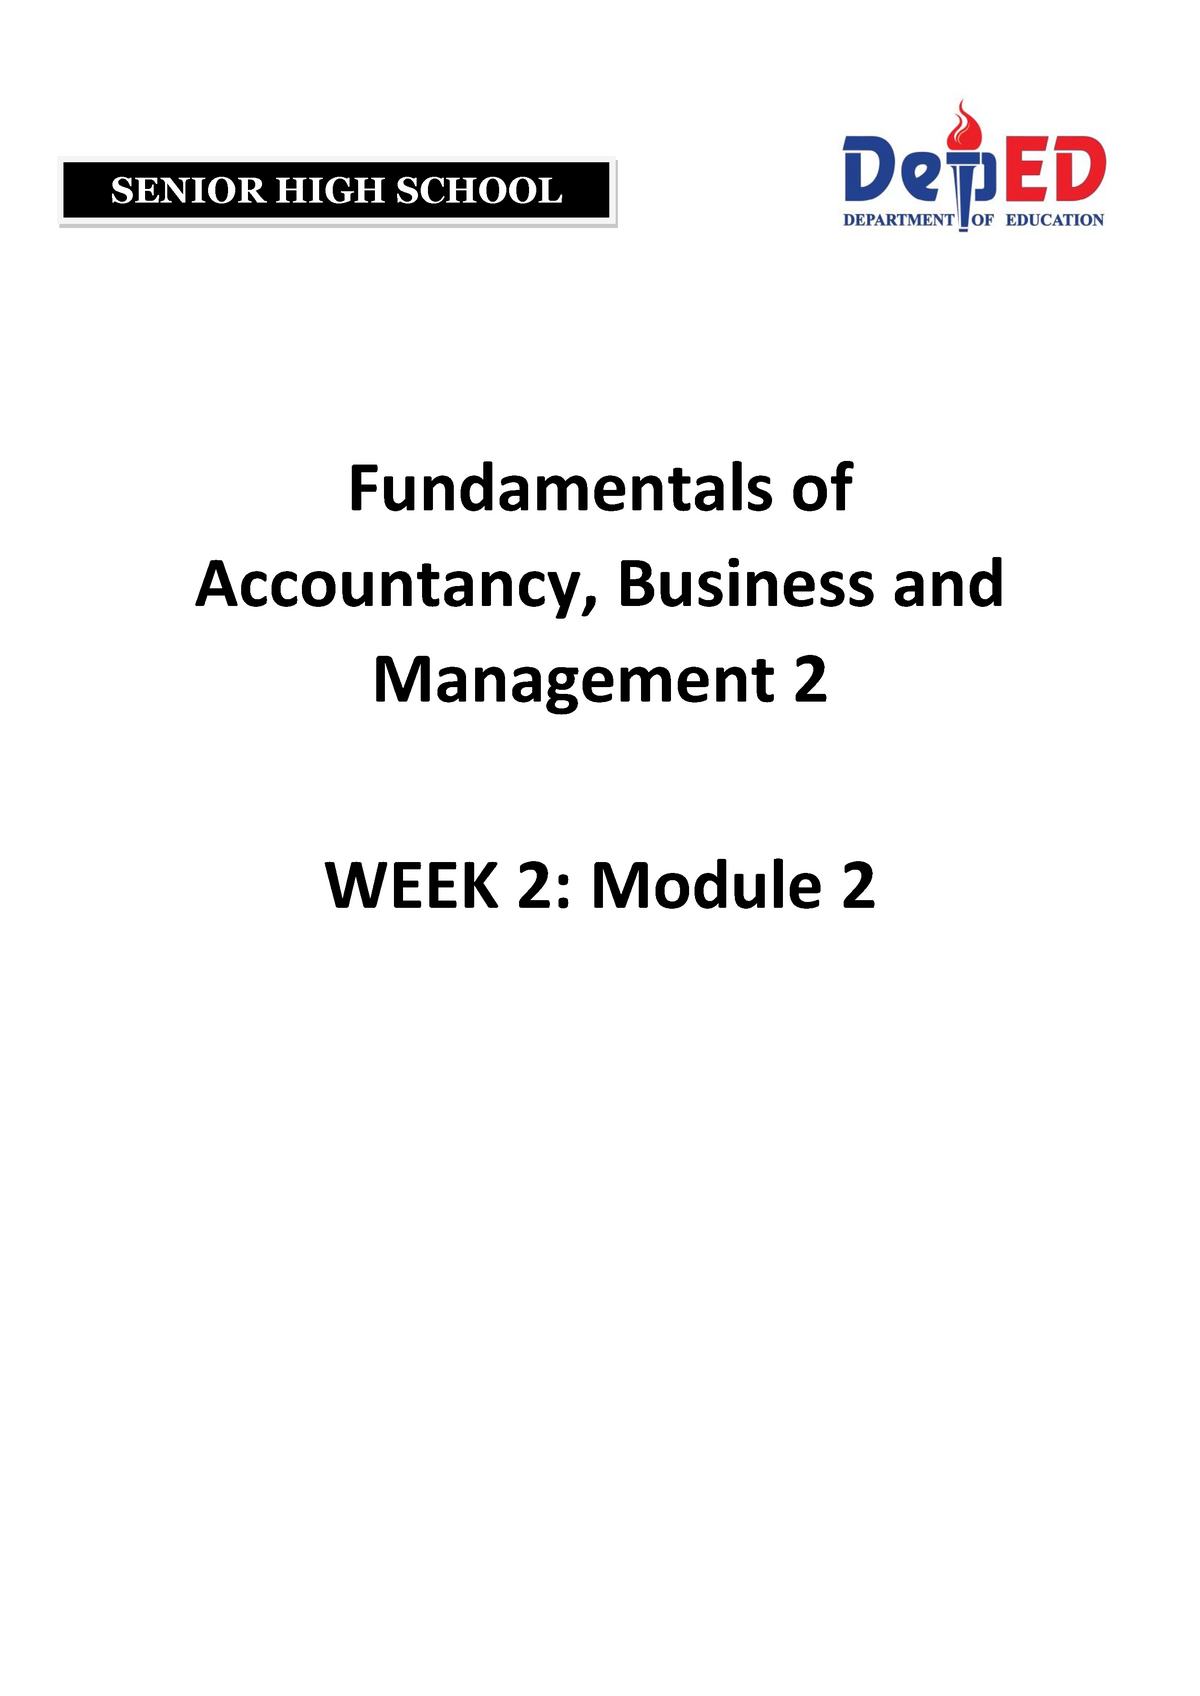 quantitative research title about accountancy business and management